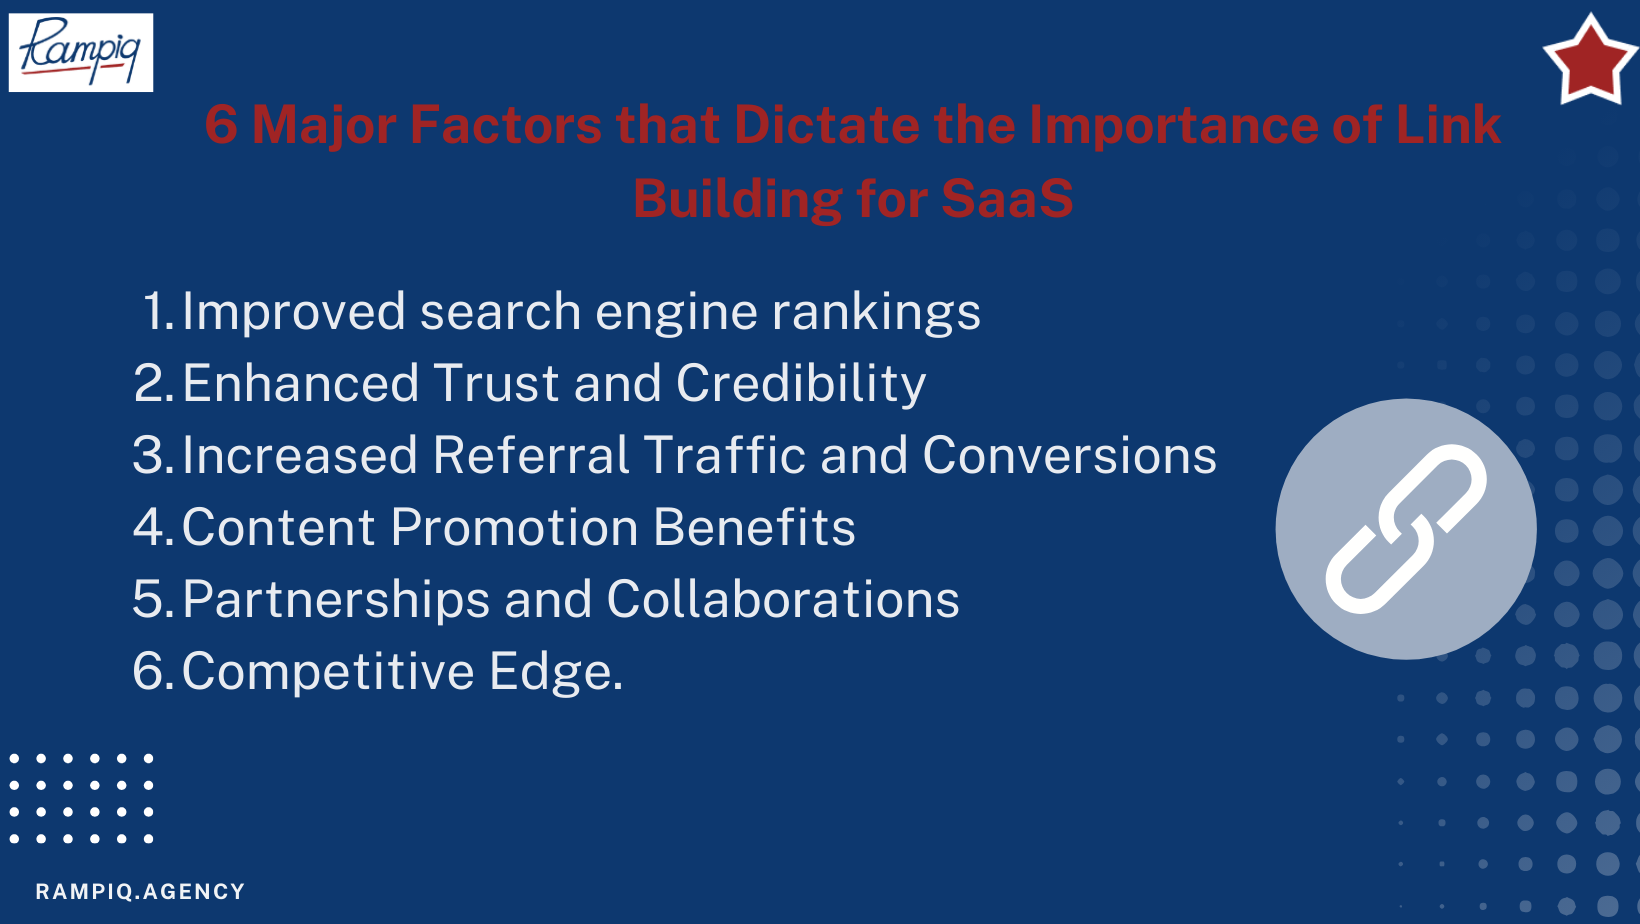 6 Major Factors that dictate the importance of link building for SaaS